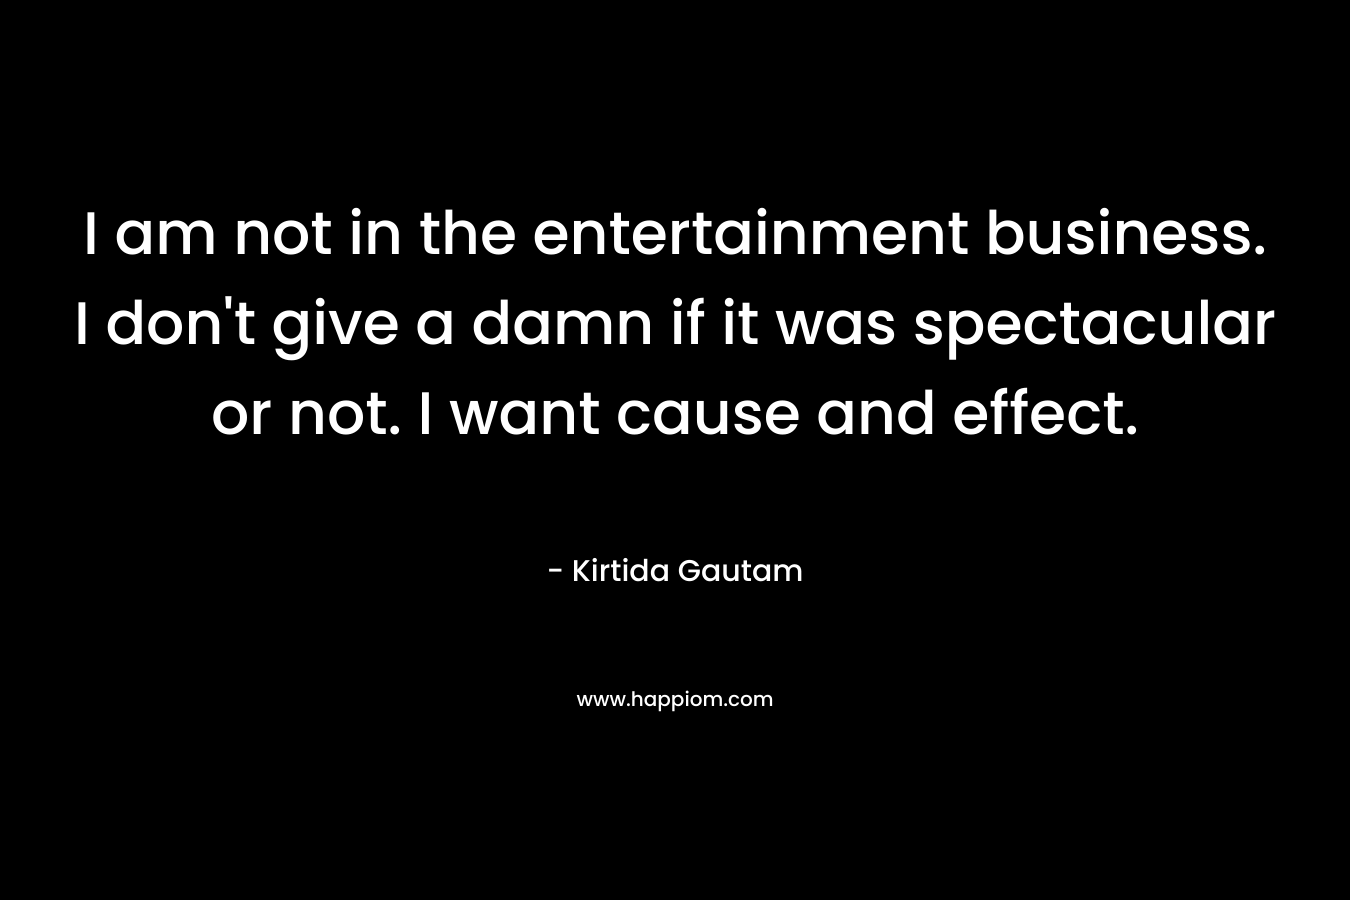 I am not in the entertainment business. I don’t give a damn if it was spectacular or not. I want cause and effect. – Kirtida Gautam